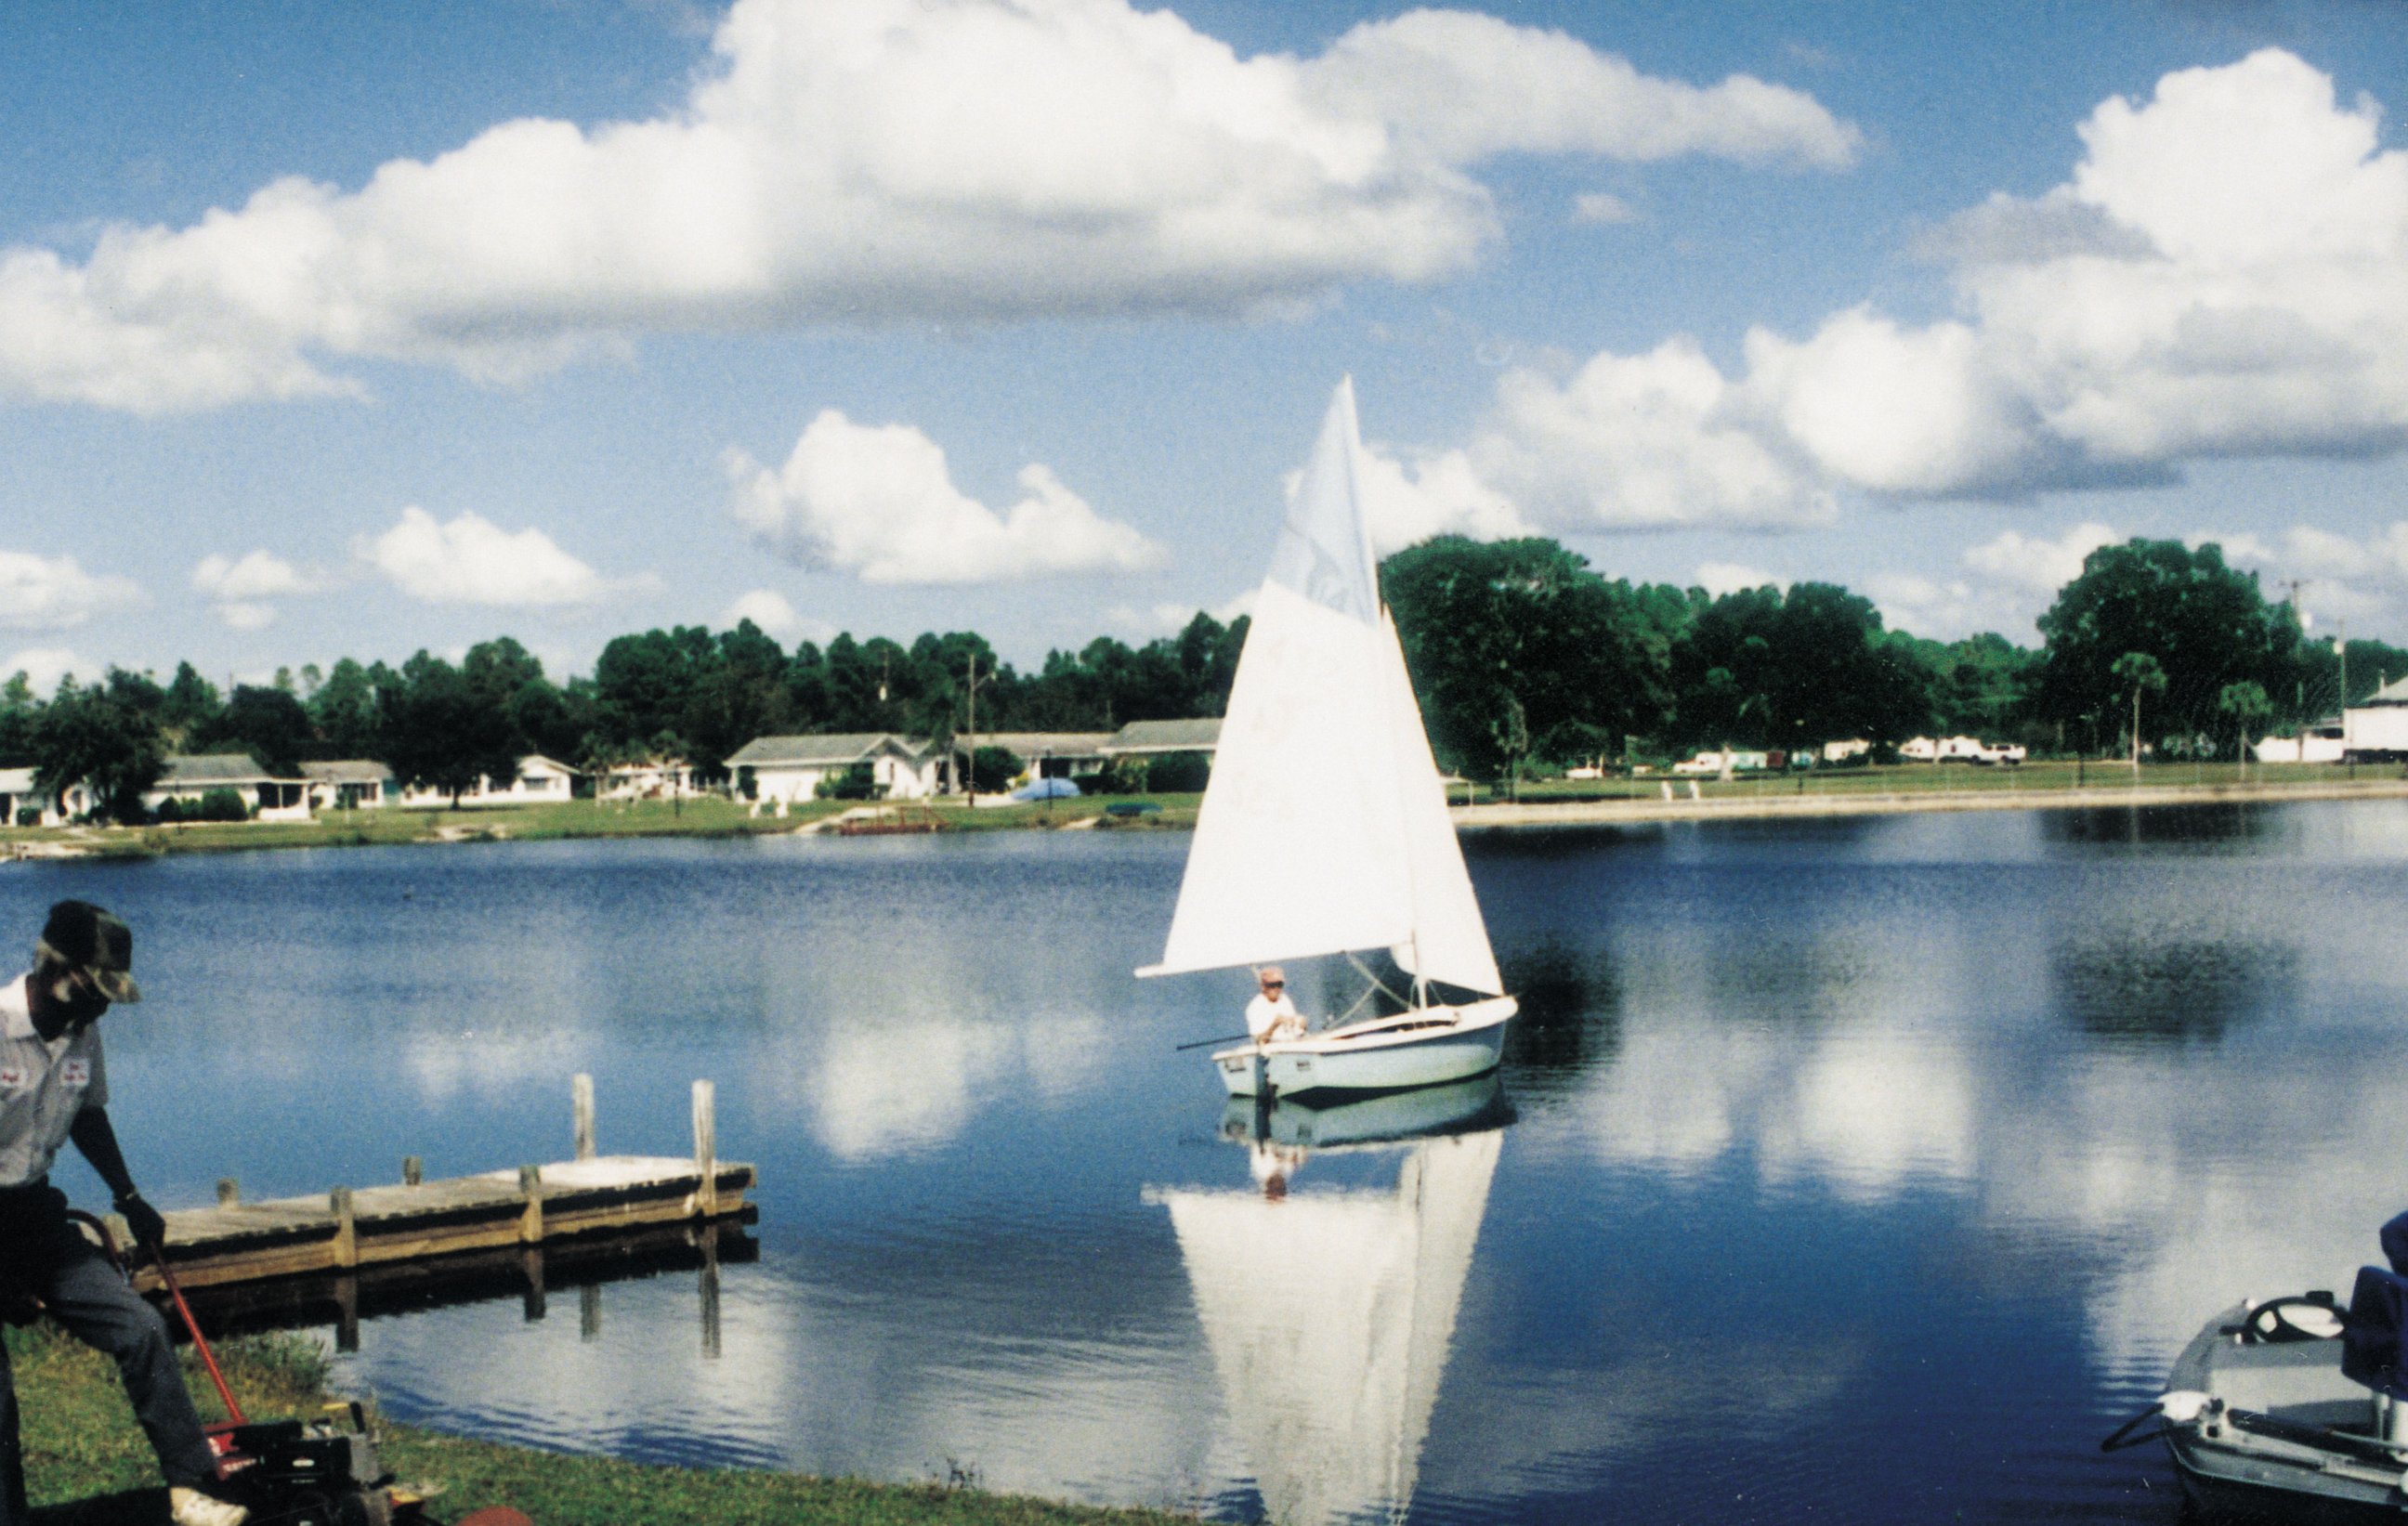 PHOTO: A lake provides boating and fishing for residents.